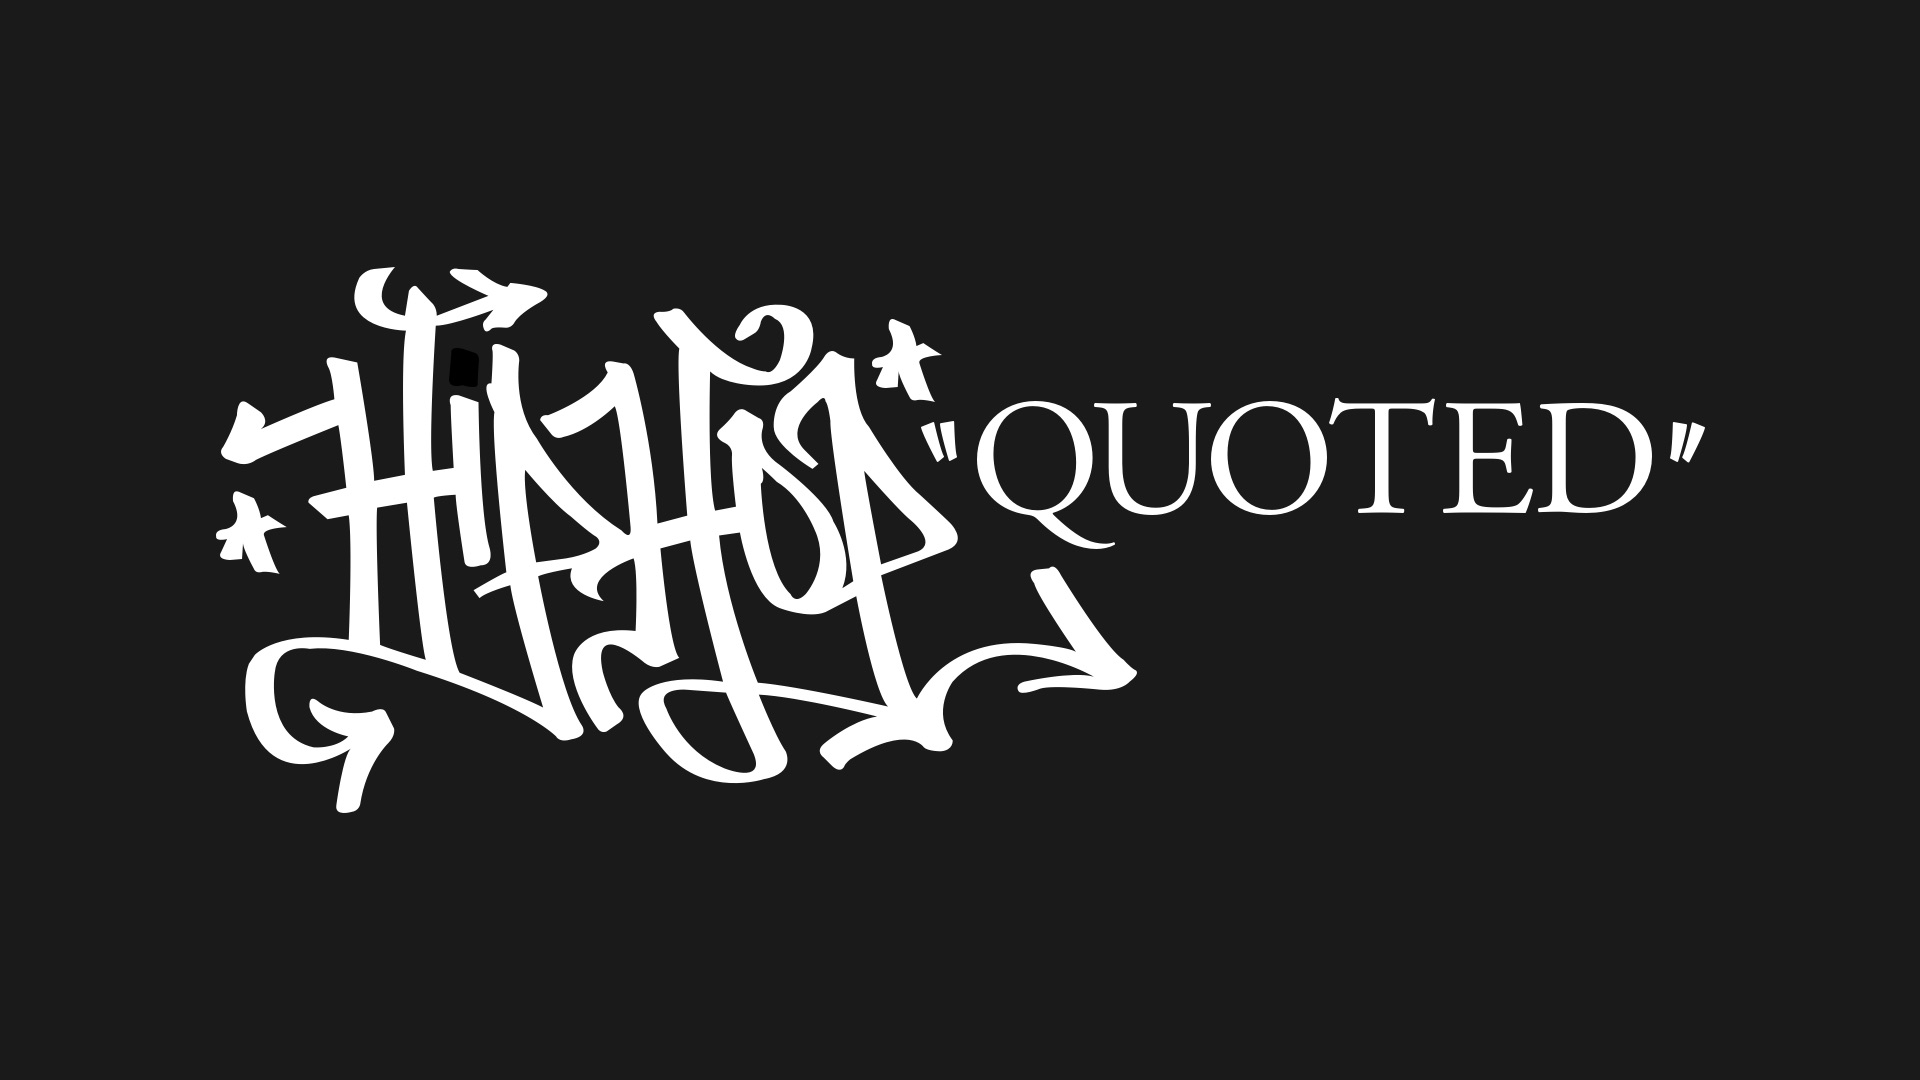 Hip hop quoted gallery 5